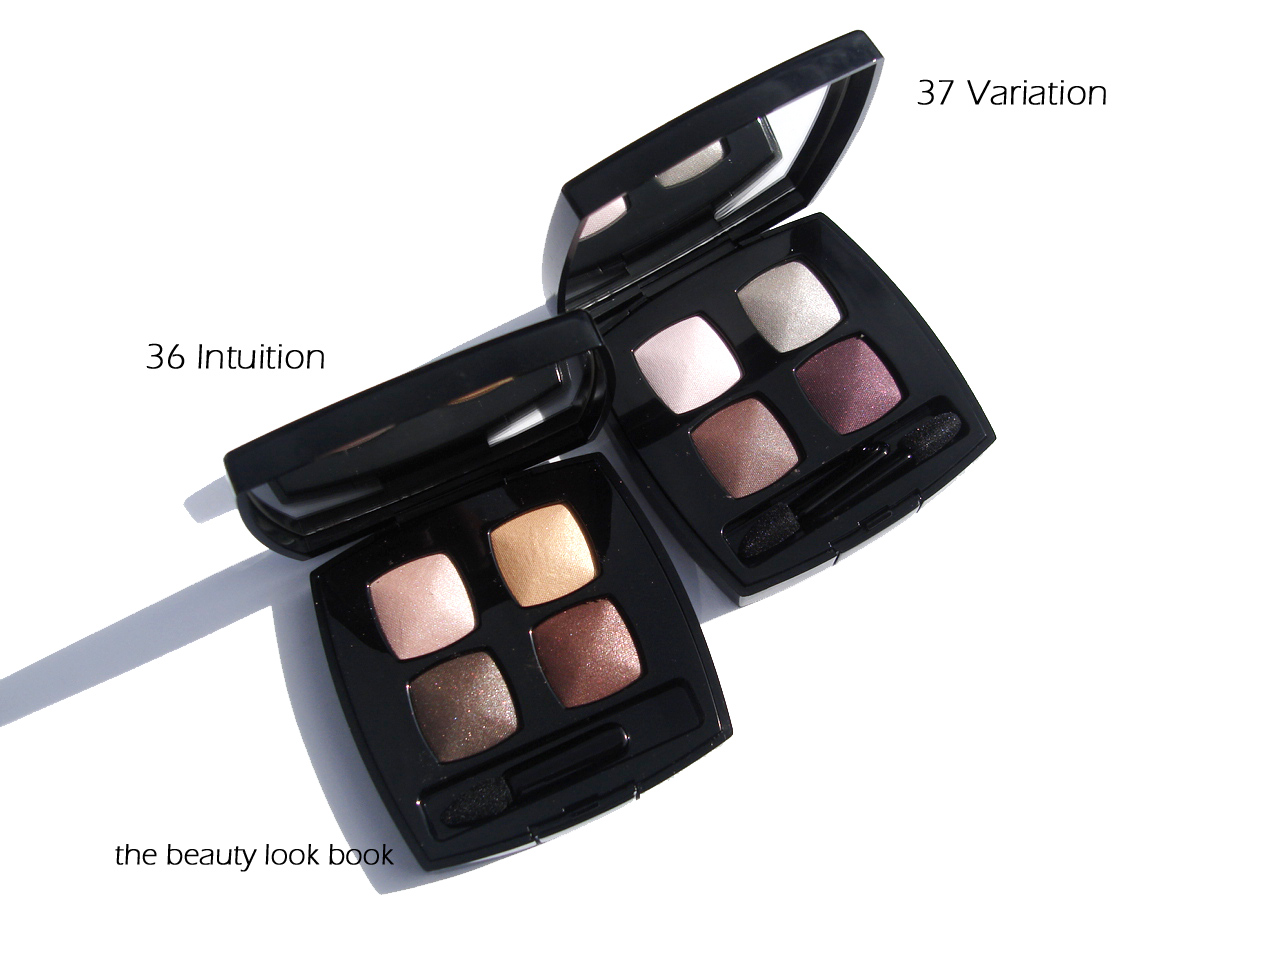 Chanel Intuition #36 and Variation #37 Quadra Eye Shadows - The Beauty Look  Book